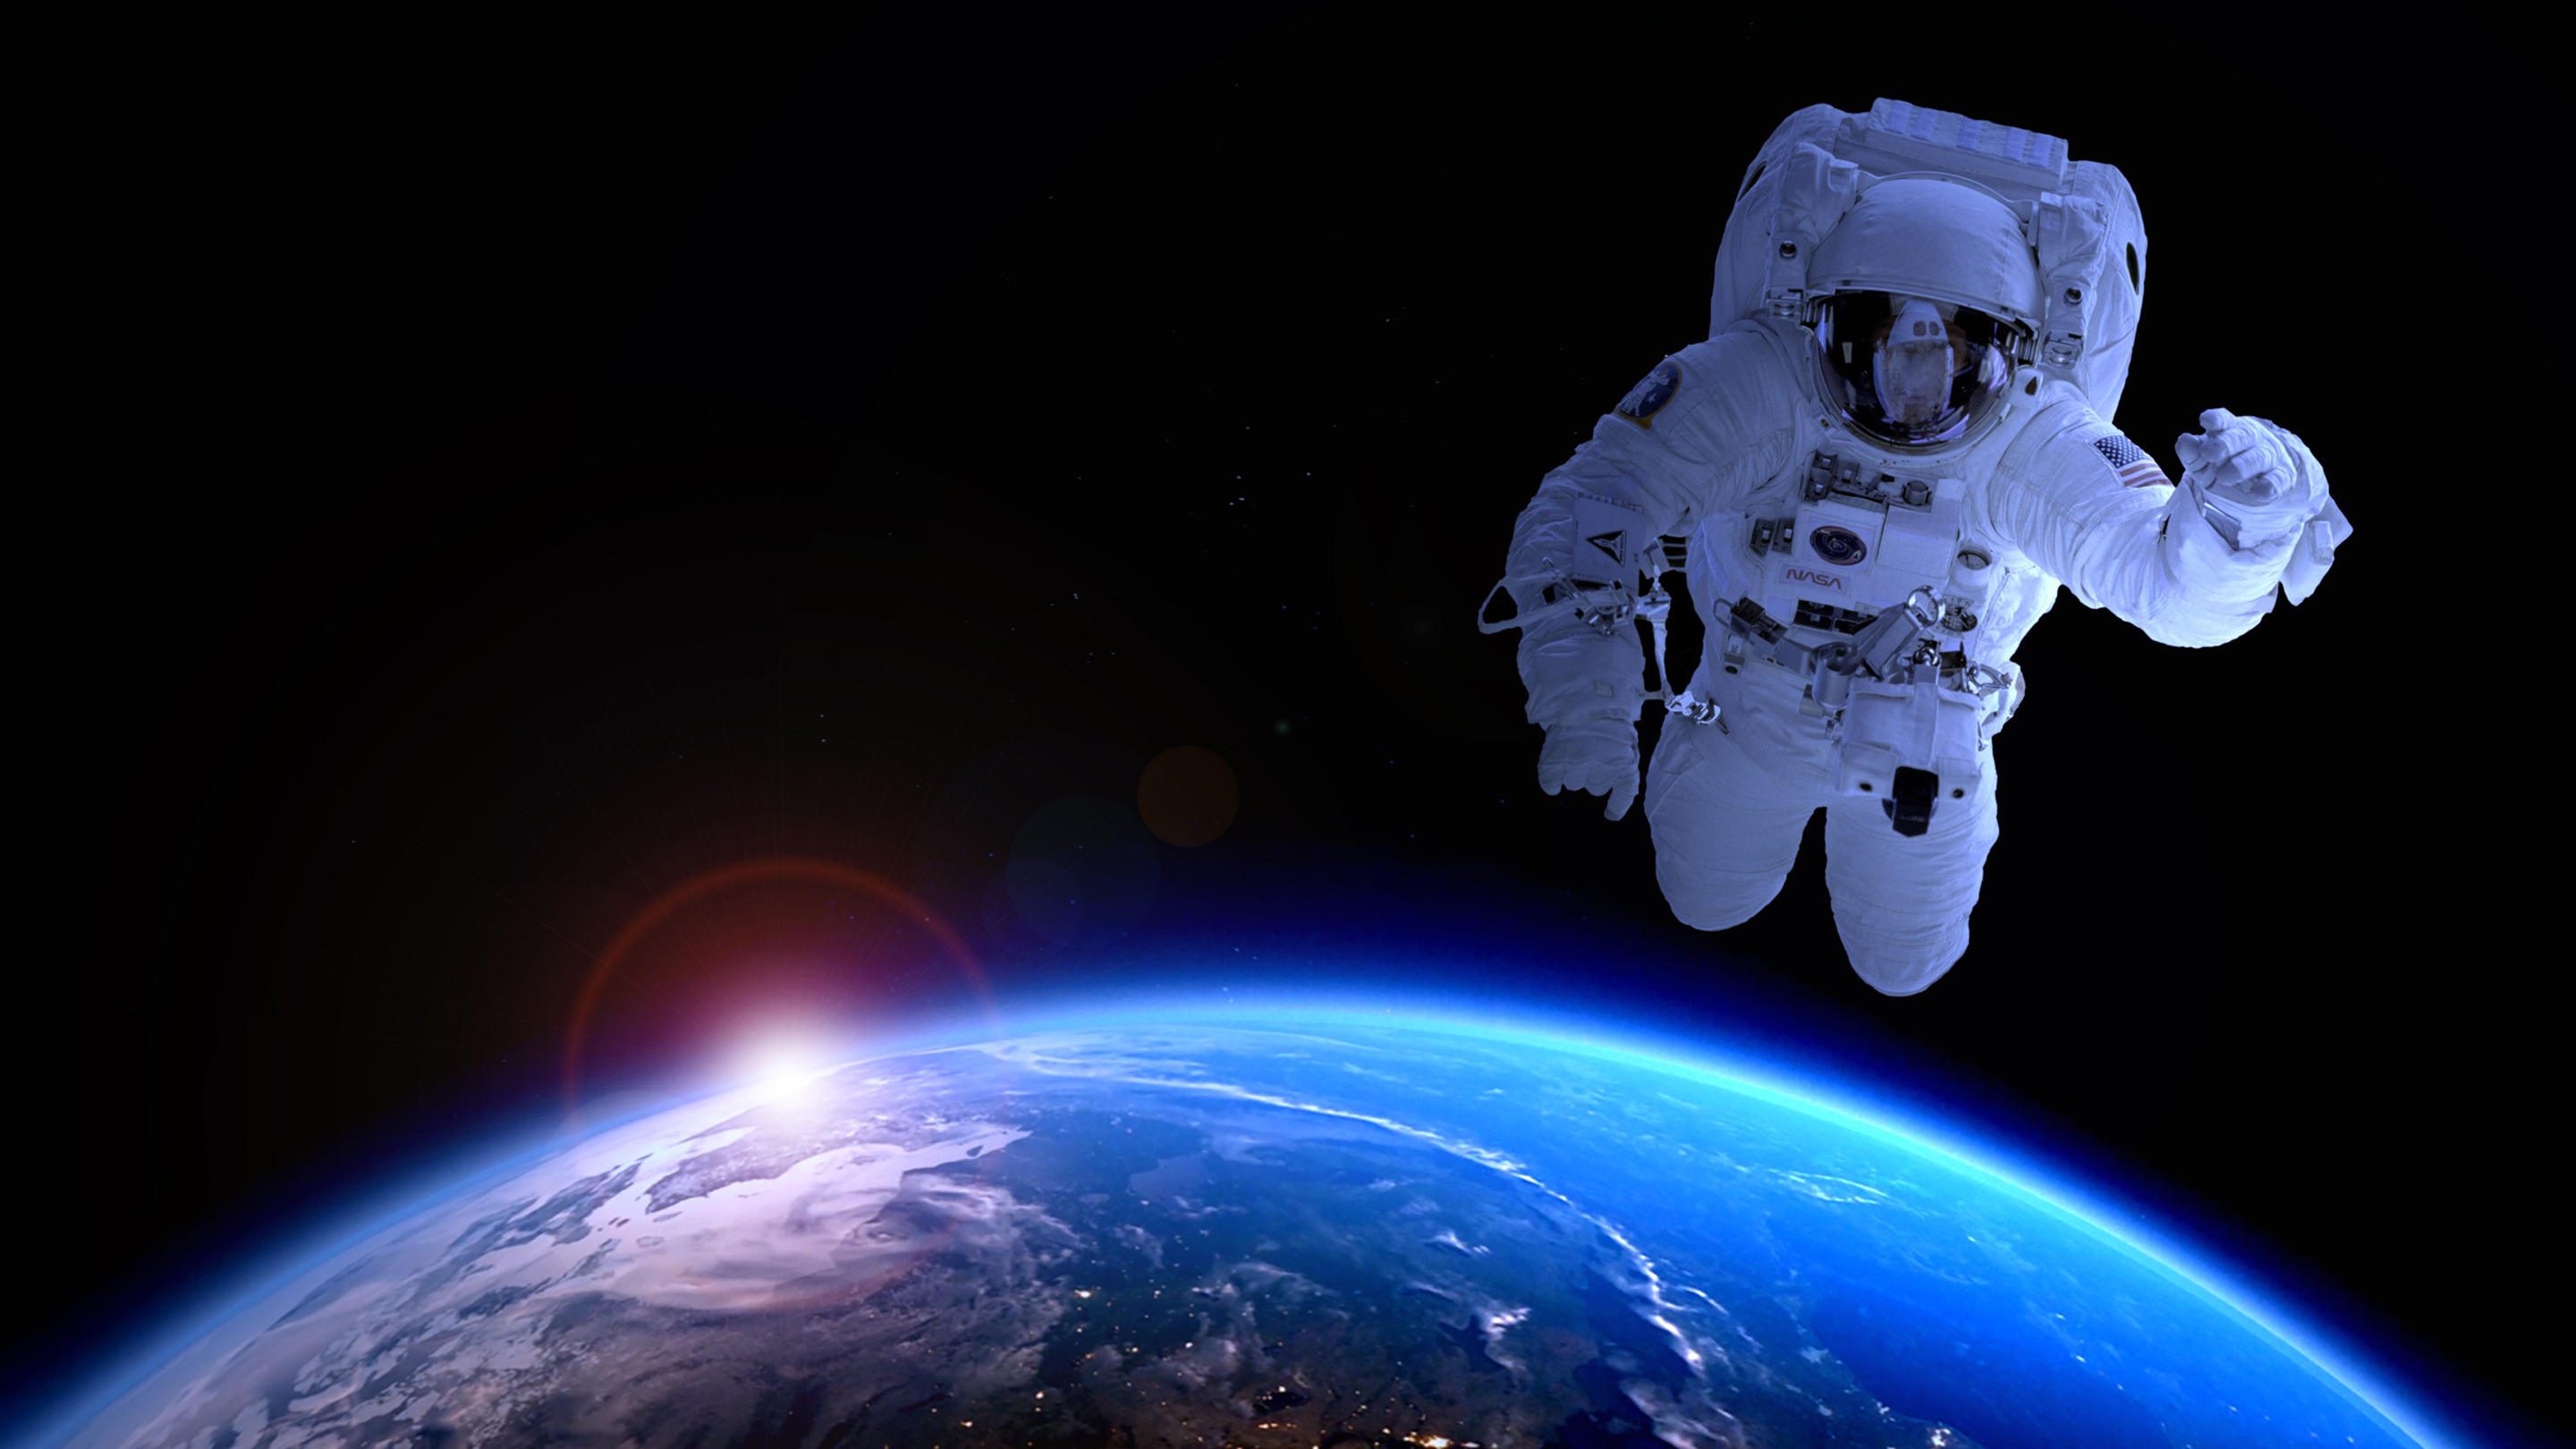 Earth Astronaut in Space Wallpapers | HD Wallpapers | ID #24641